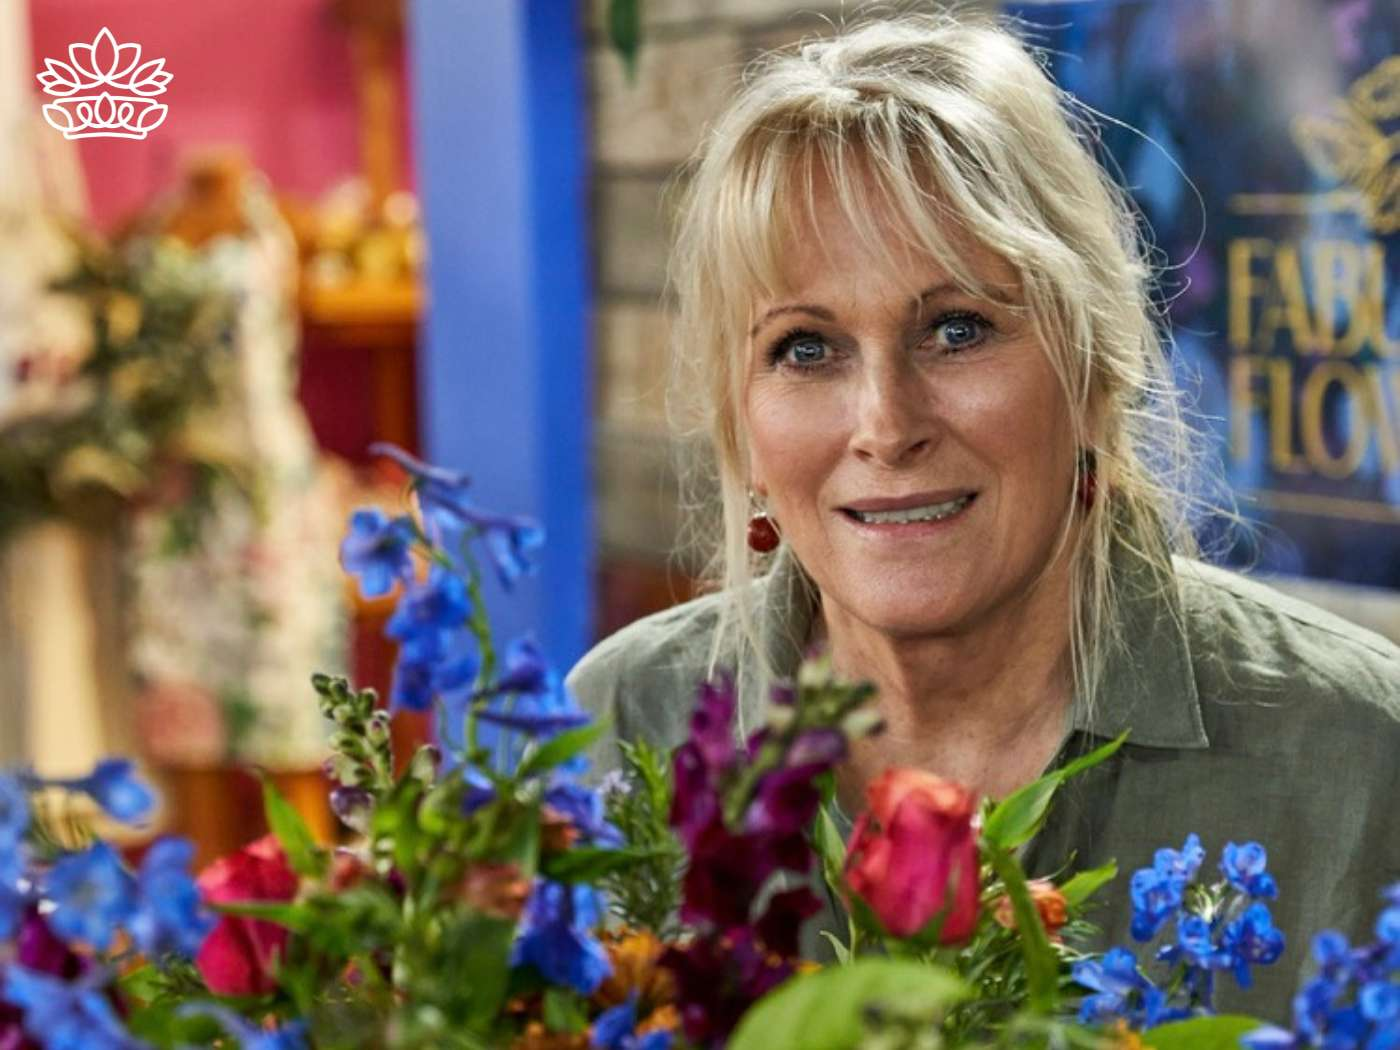 Friendly florist with a welcoming smile arranging a vibrant selection in a flower arrangement, crafting beauty at Fabulous Flowers and Gifts.